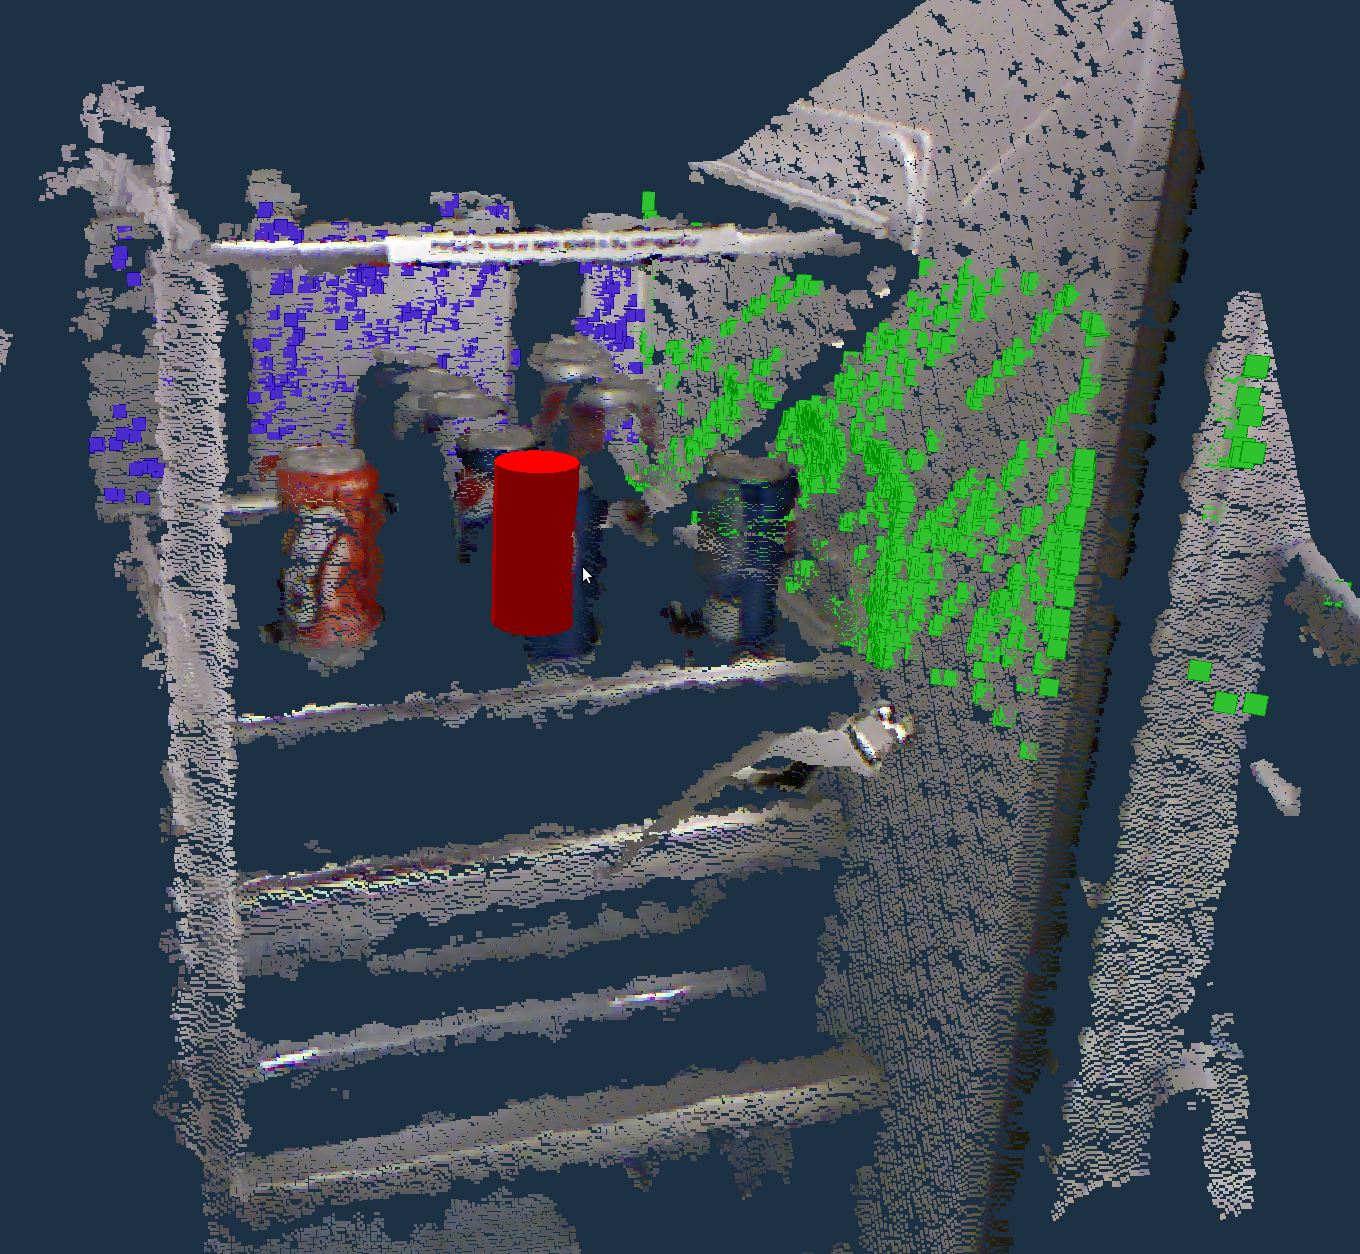 A screen shot from rviz with the detected can visualized with a marker, The marker is displayed on top of the kinect point cloud